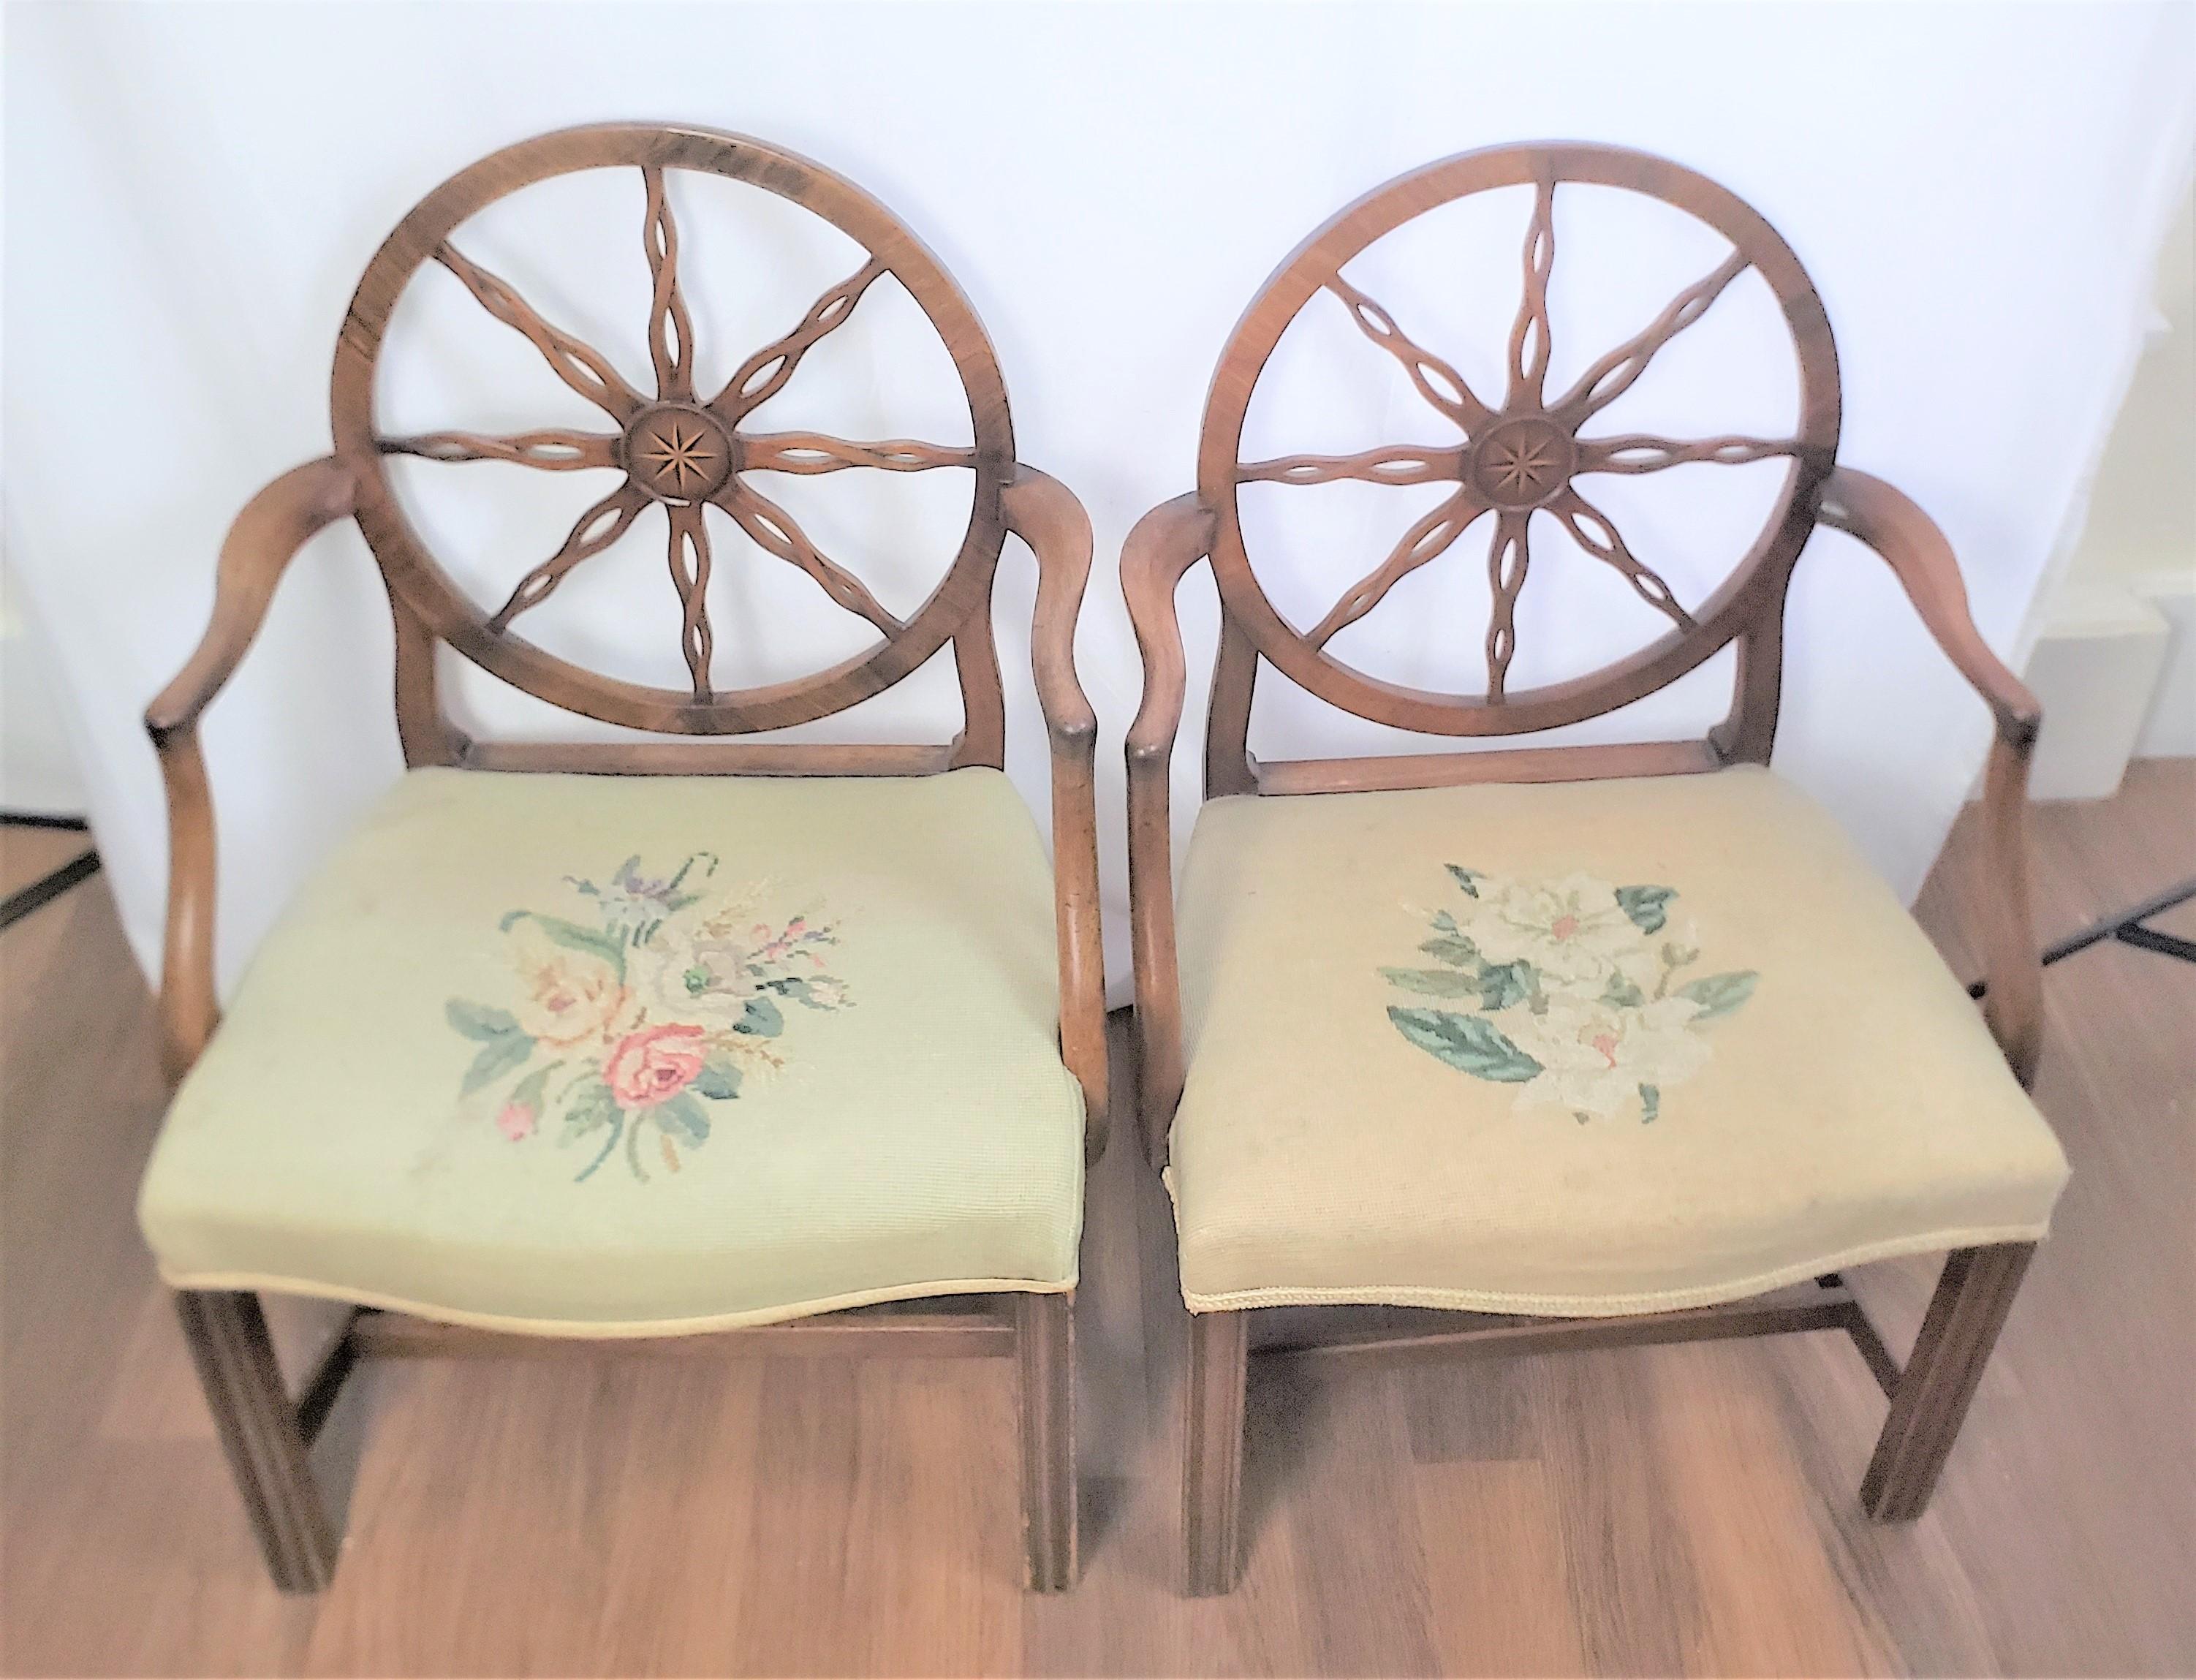 Pair of Antique King George III Period Wheelback Armchair or Side Chair Frames In Good Condition For Sale In Hamilton, Ontario